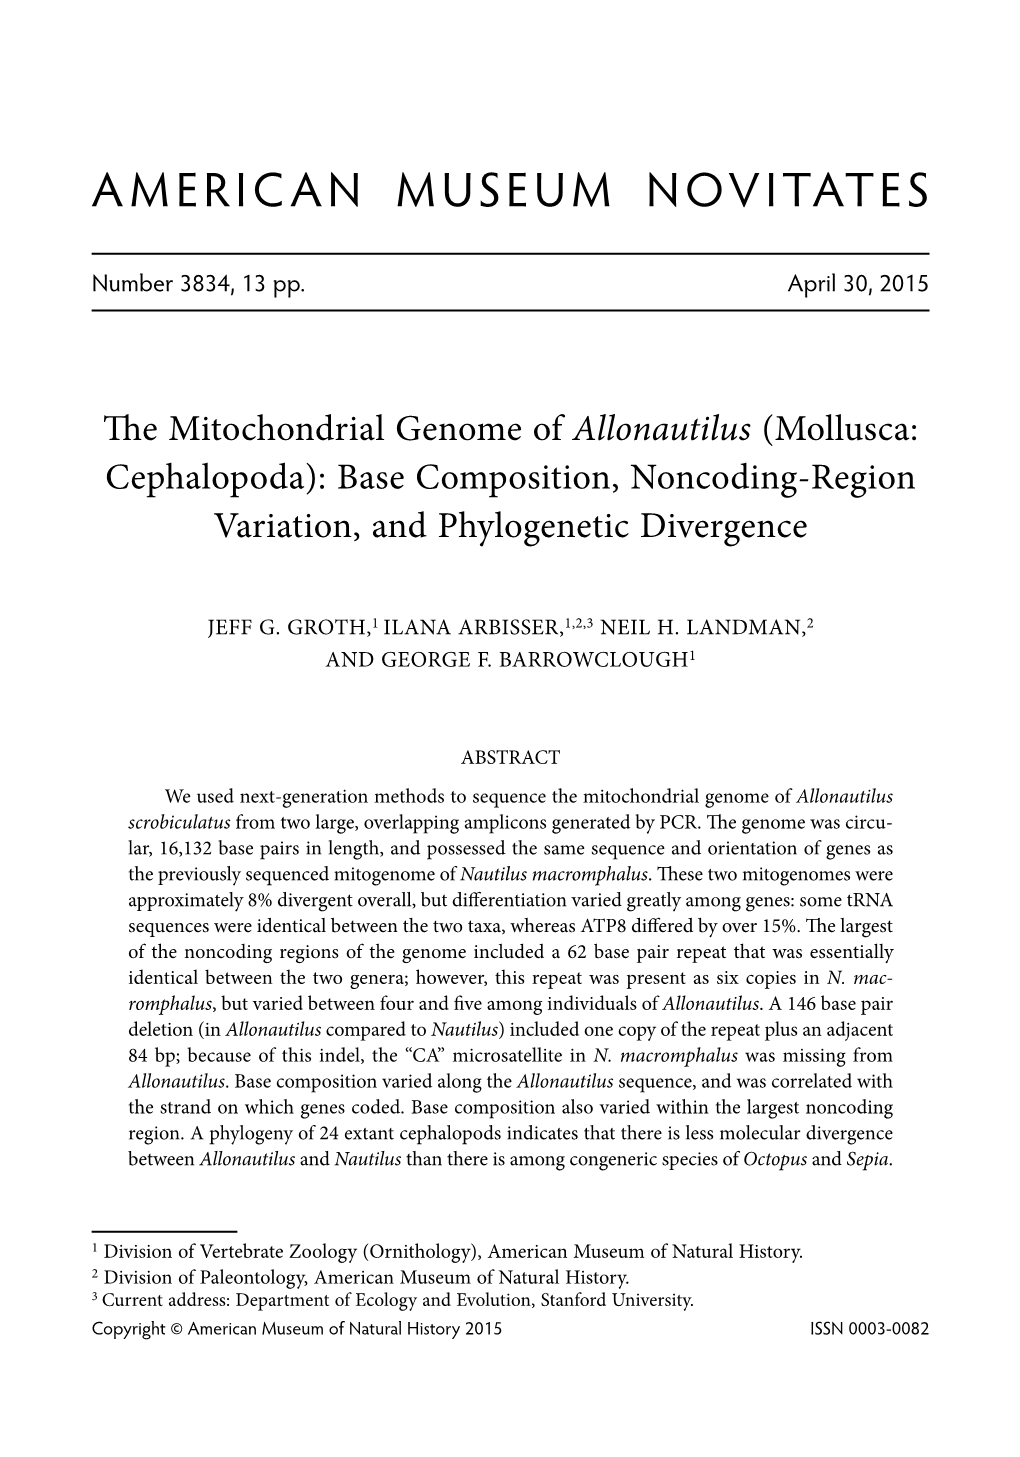 The Mitochondrial Genome of Allonautilus (Mollusca: Cephalopoda): Base Composition, Noncoding-Region Variation, and Phylogenetic Divergence